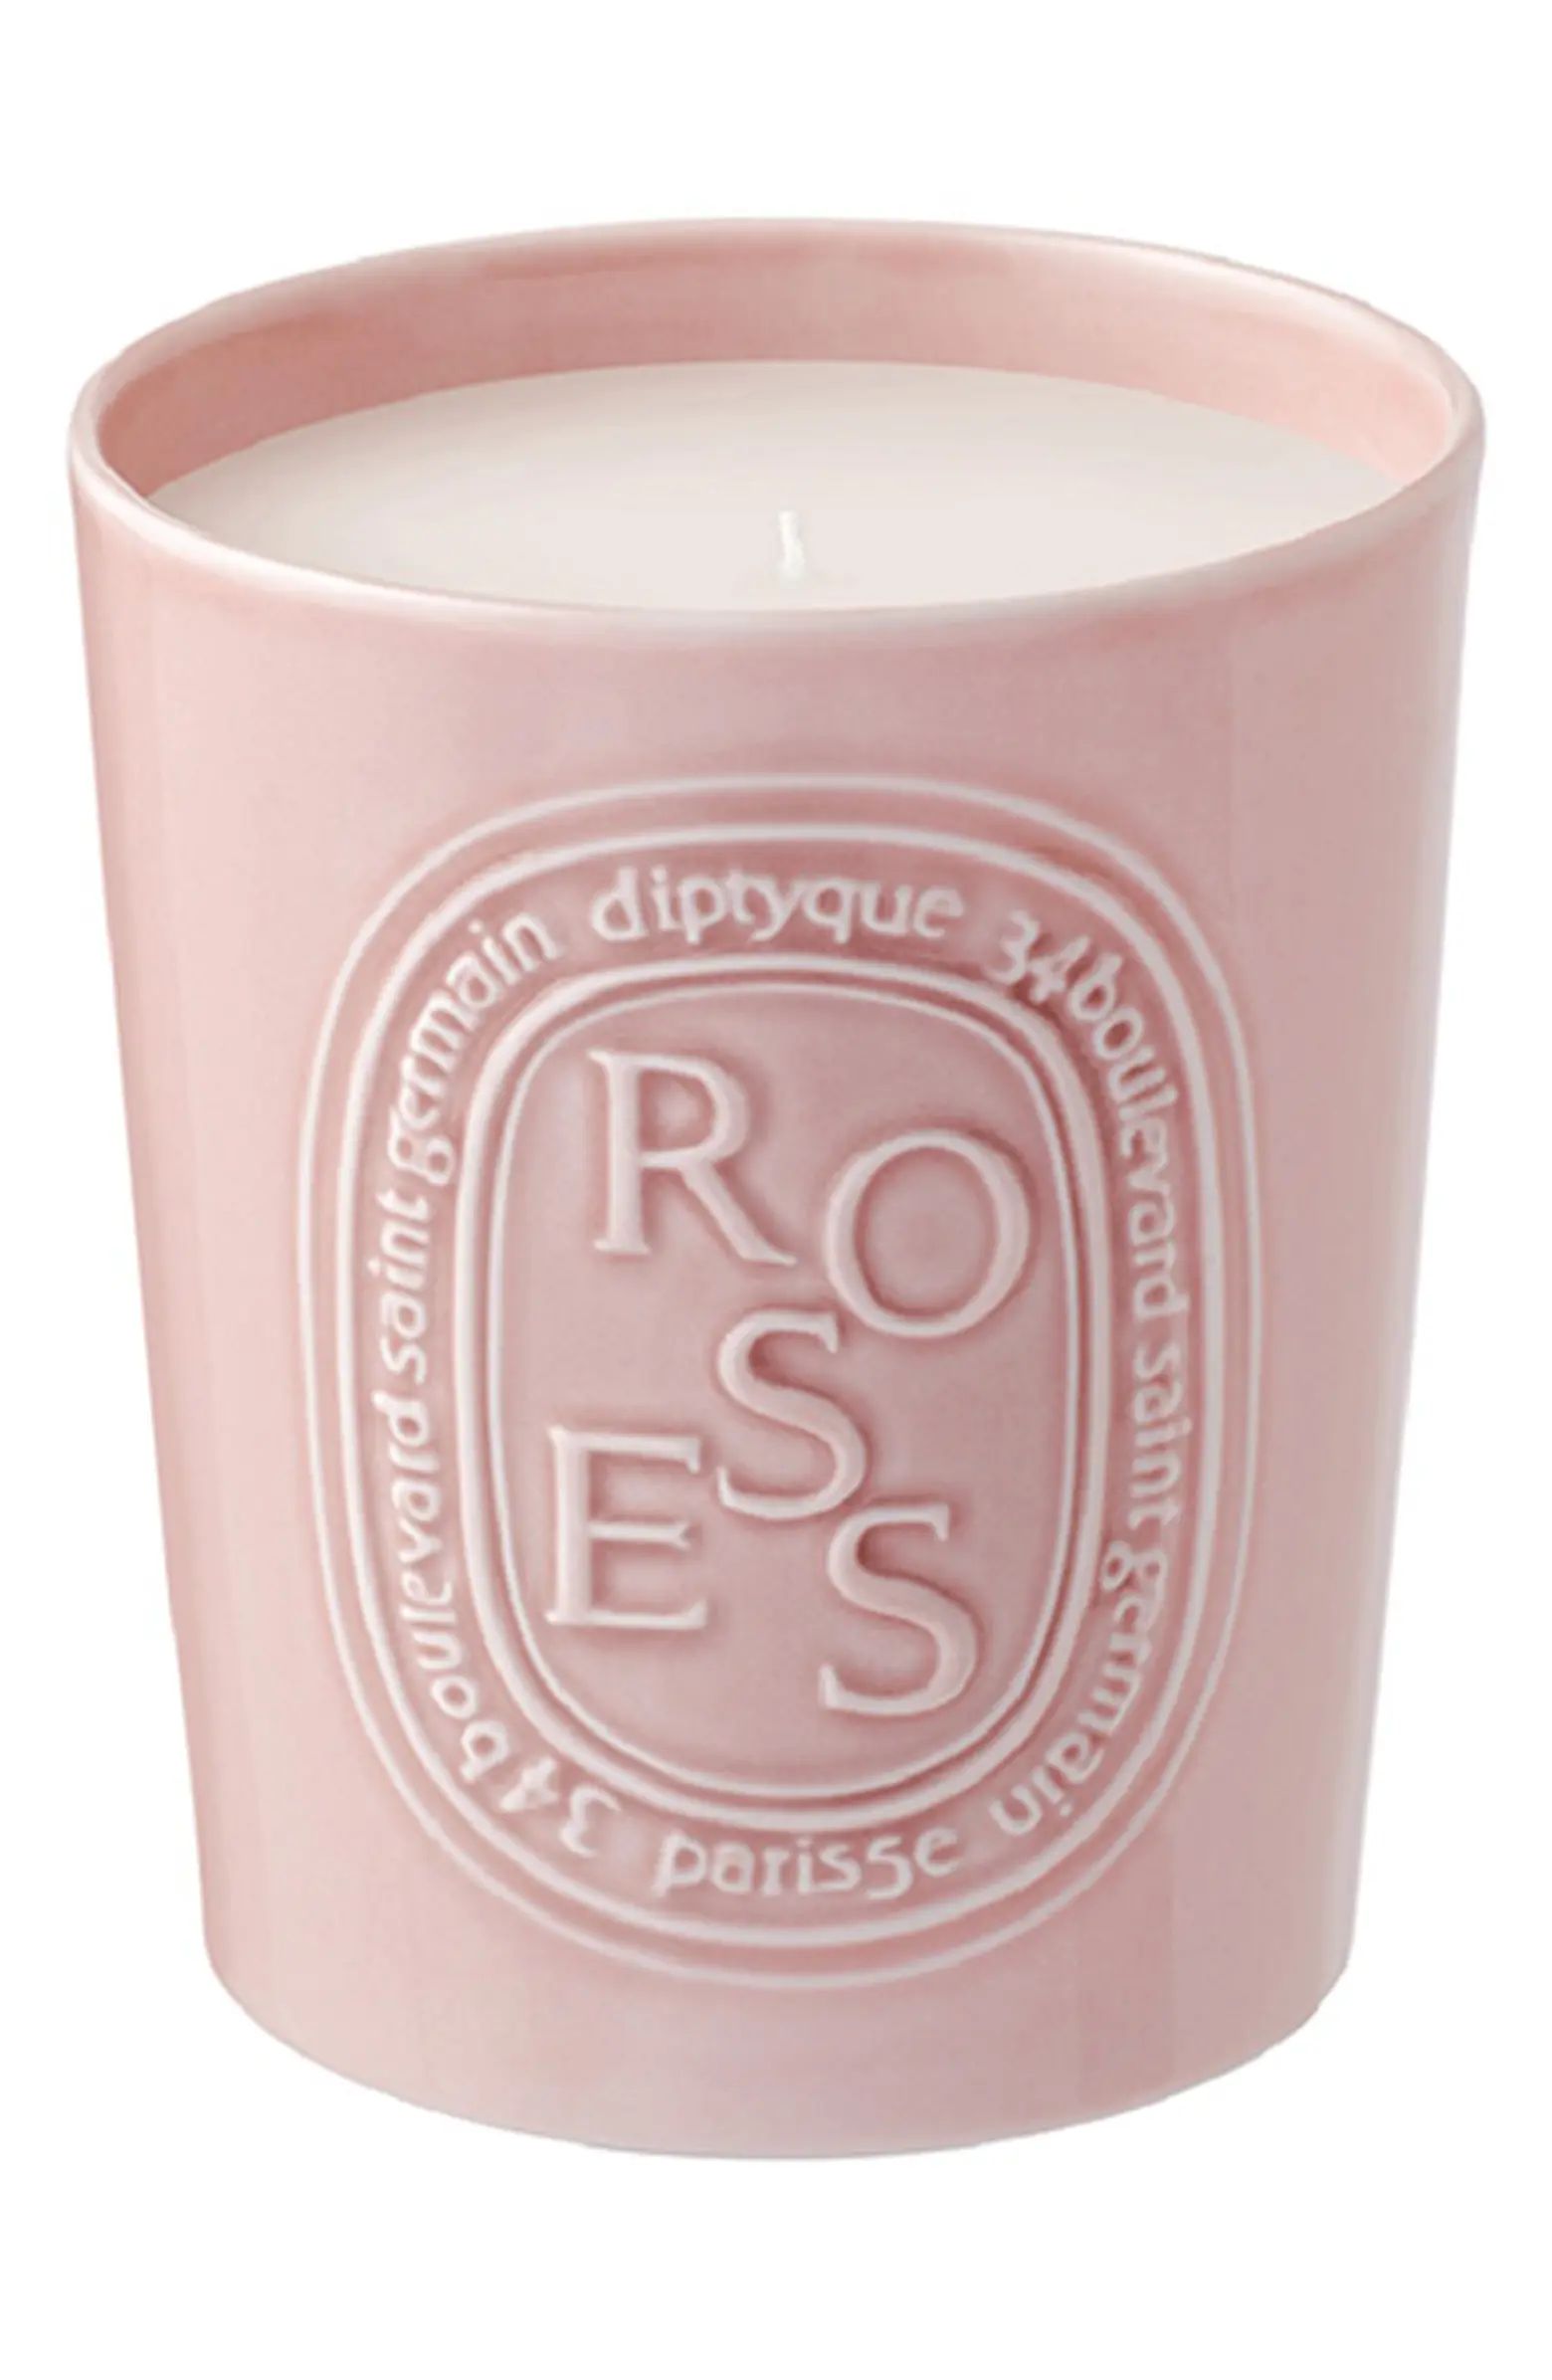 Roses Large Scented Candle | Nordstrom